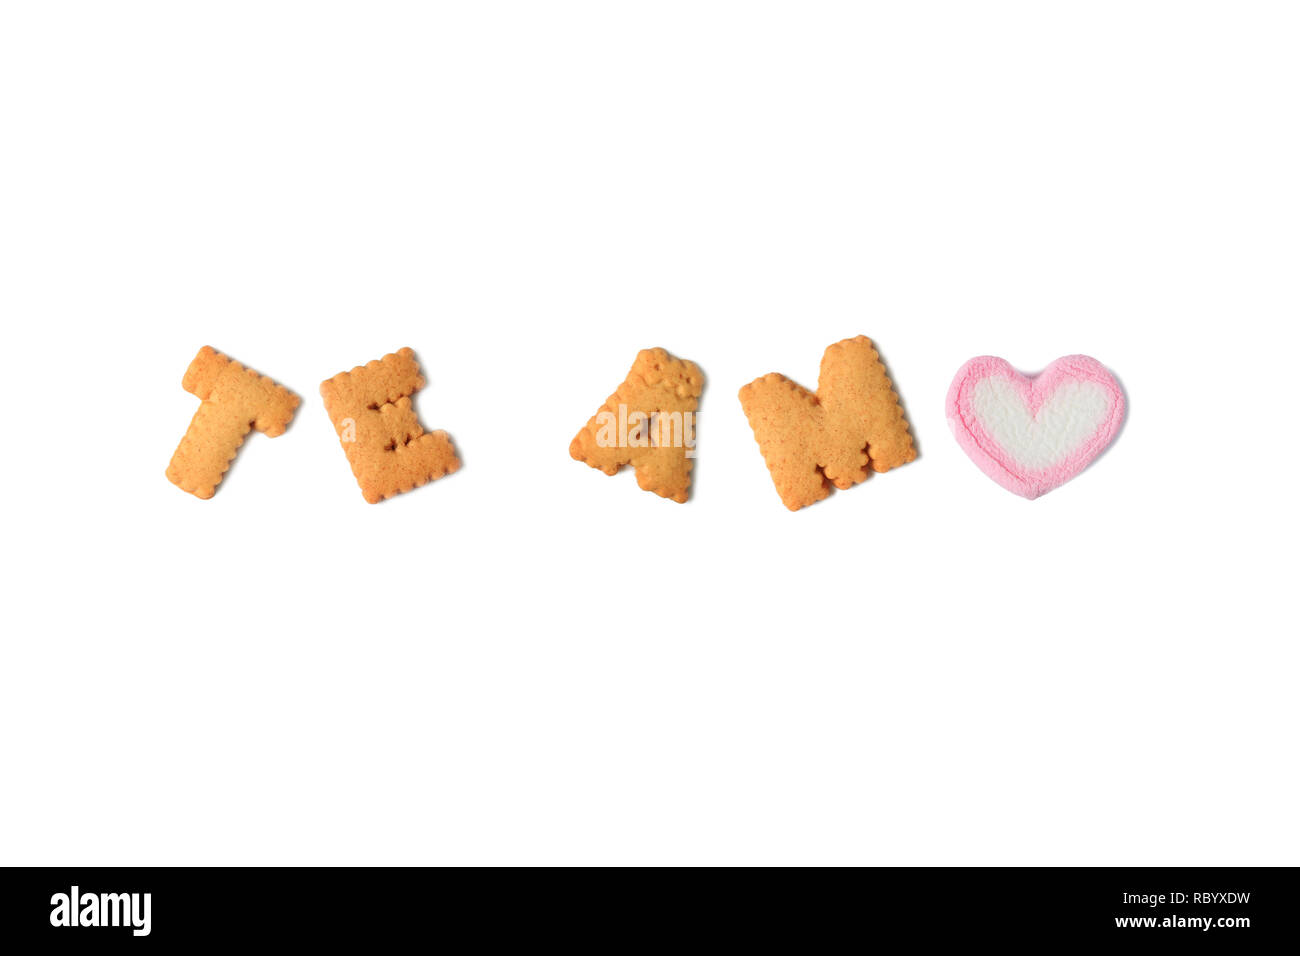 The word TE AMO Meaning I LOVE YOU in Spanish spelled with alphabet shaped biscuits and a heart shaped marshmallow candy on white background Stock Photo